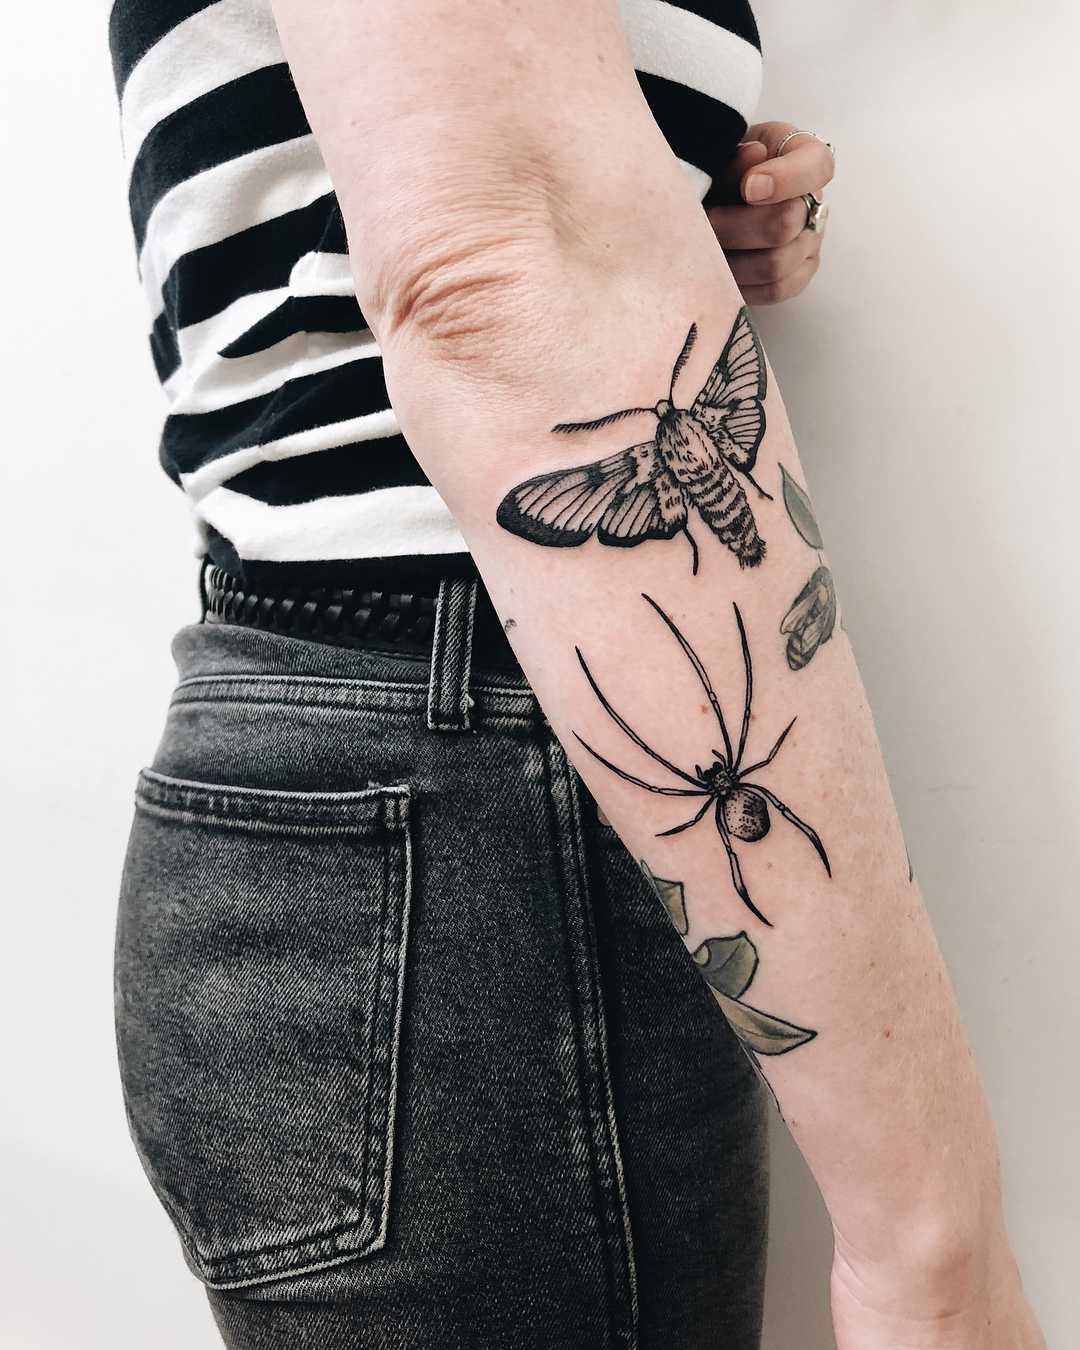 Spider and moth tattoo by Finley Jordan